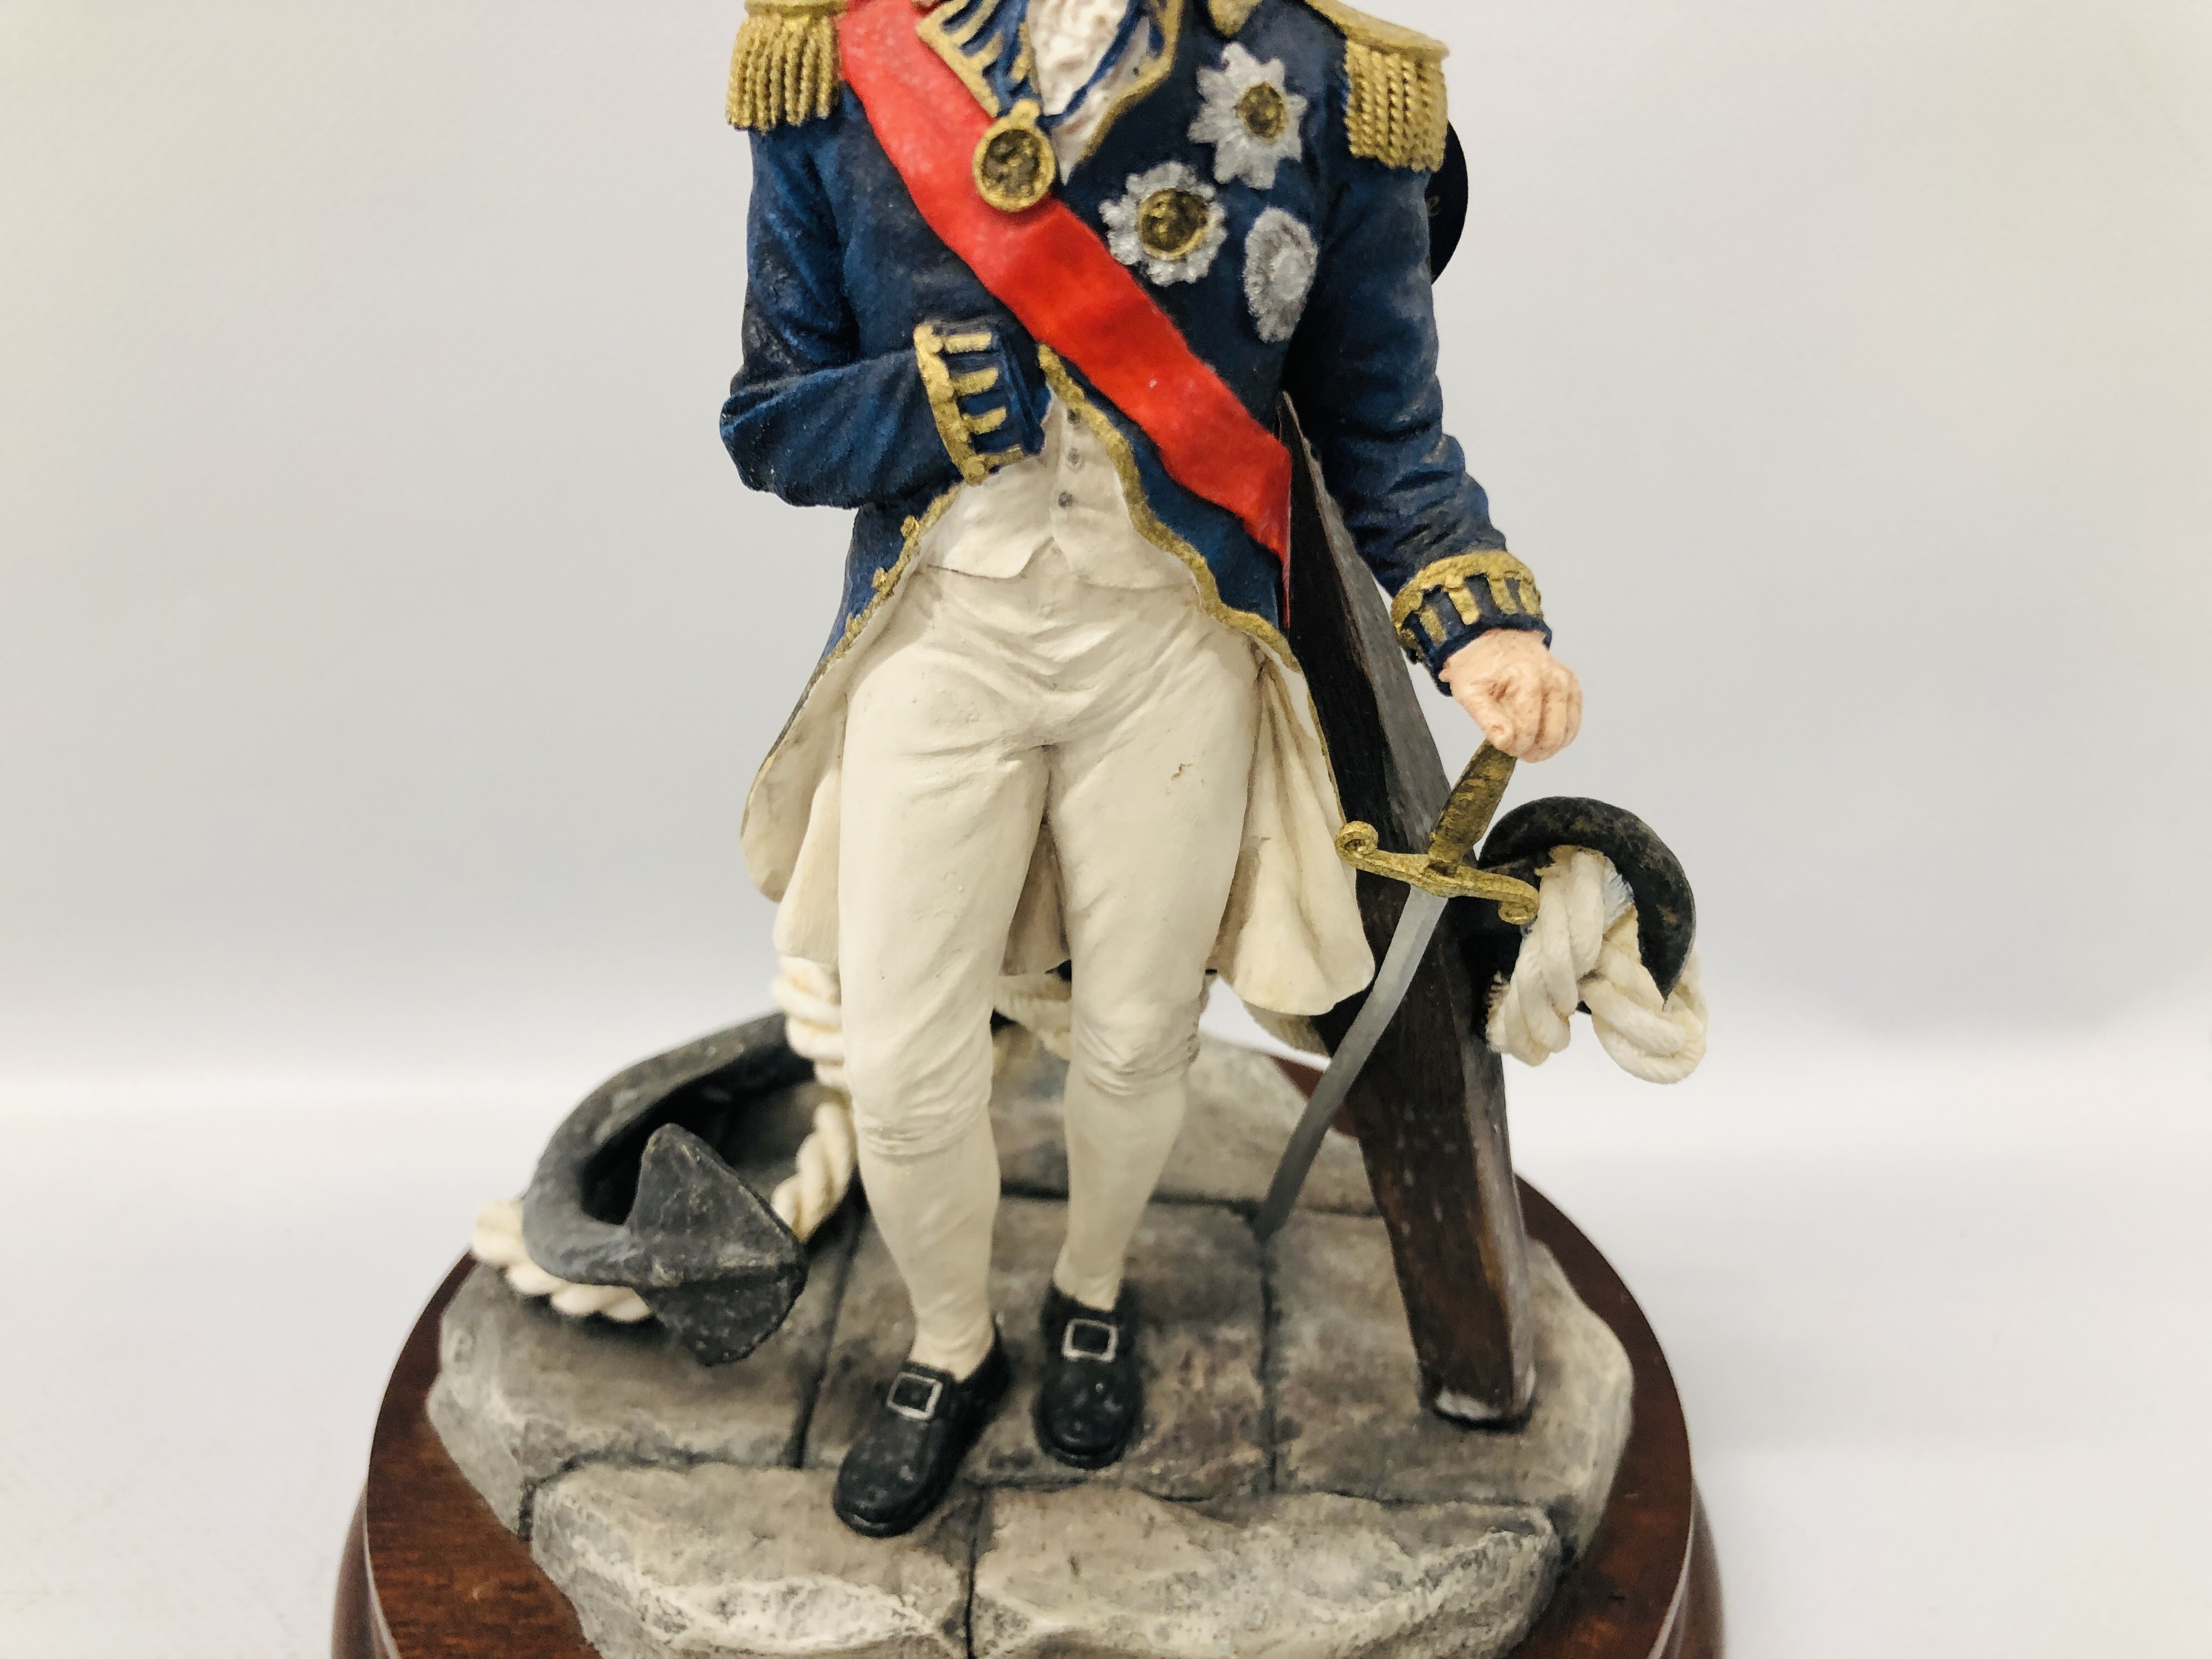 BORDER FINE ARTS LIMITED EDITION SCULPTURE 118 / 500 "ADMIRAL LORD NELSON" ALONG WITH ORIGINAL BOX - Image 3 of 12